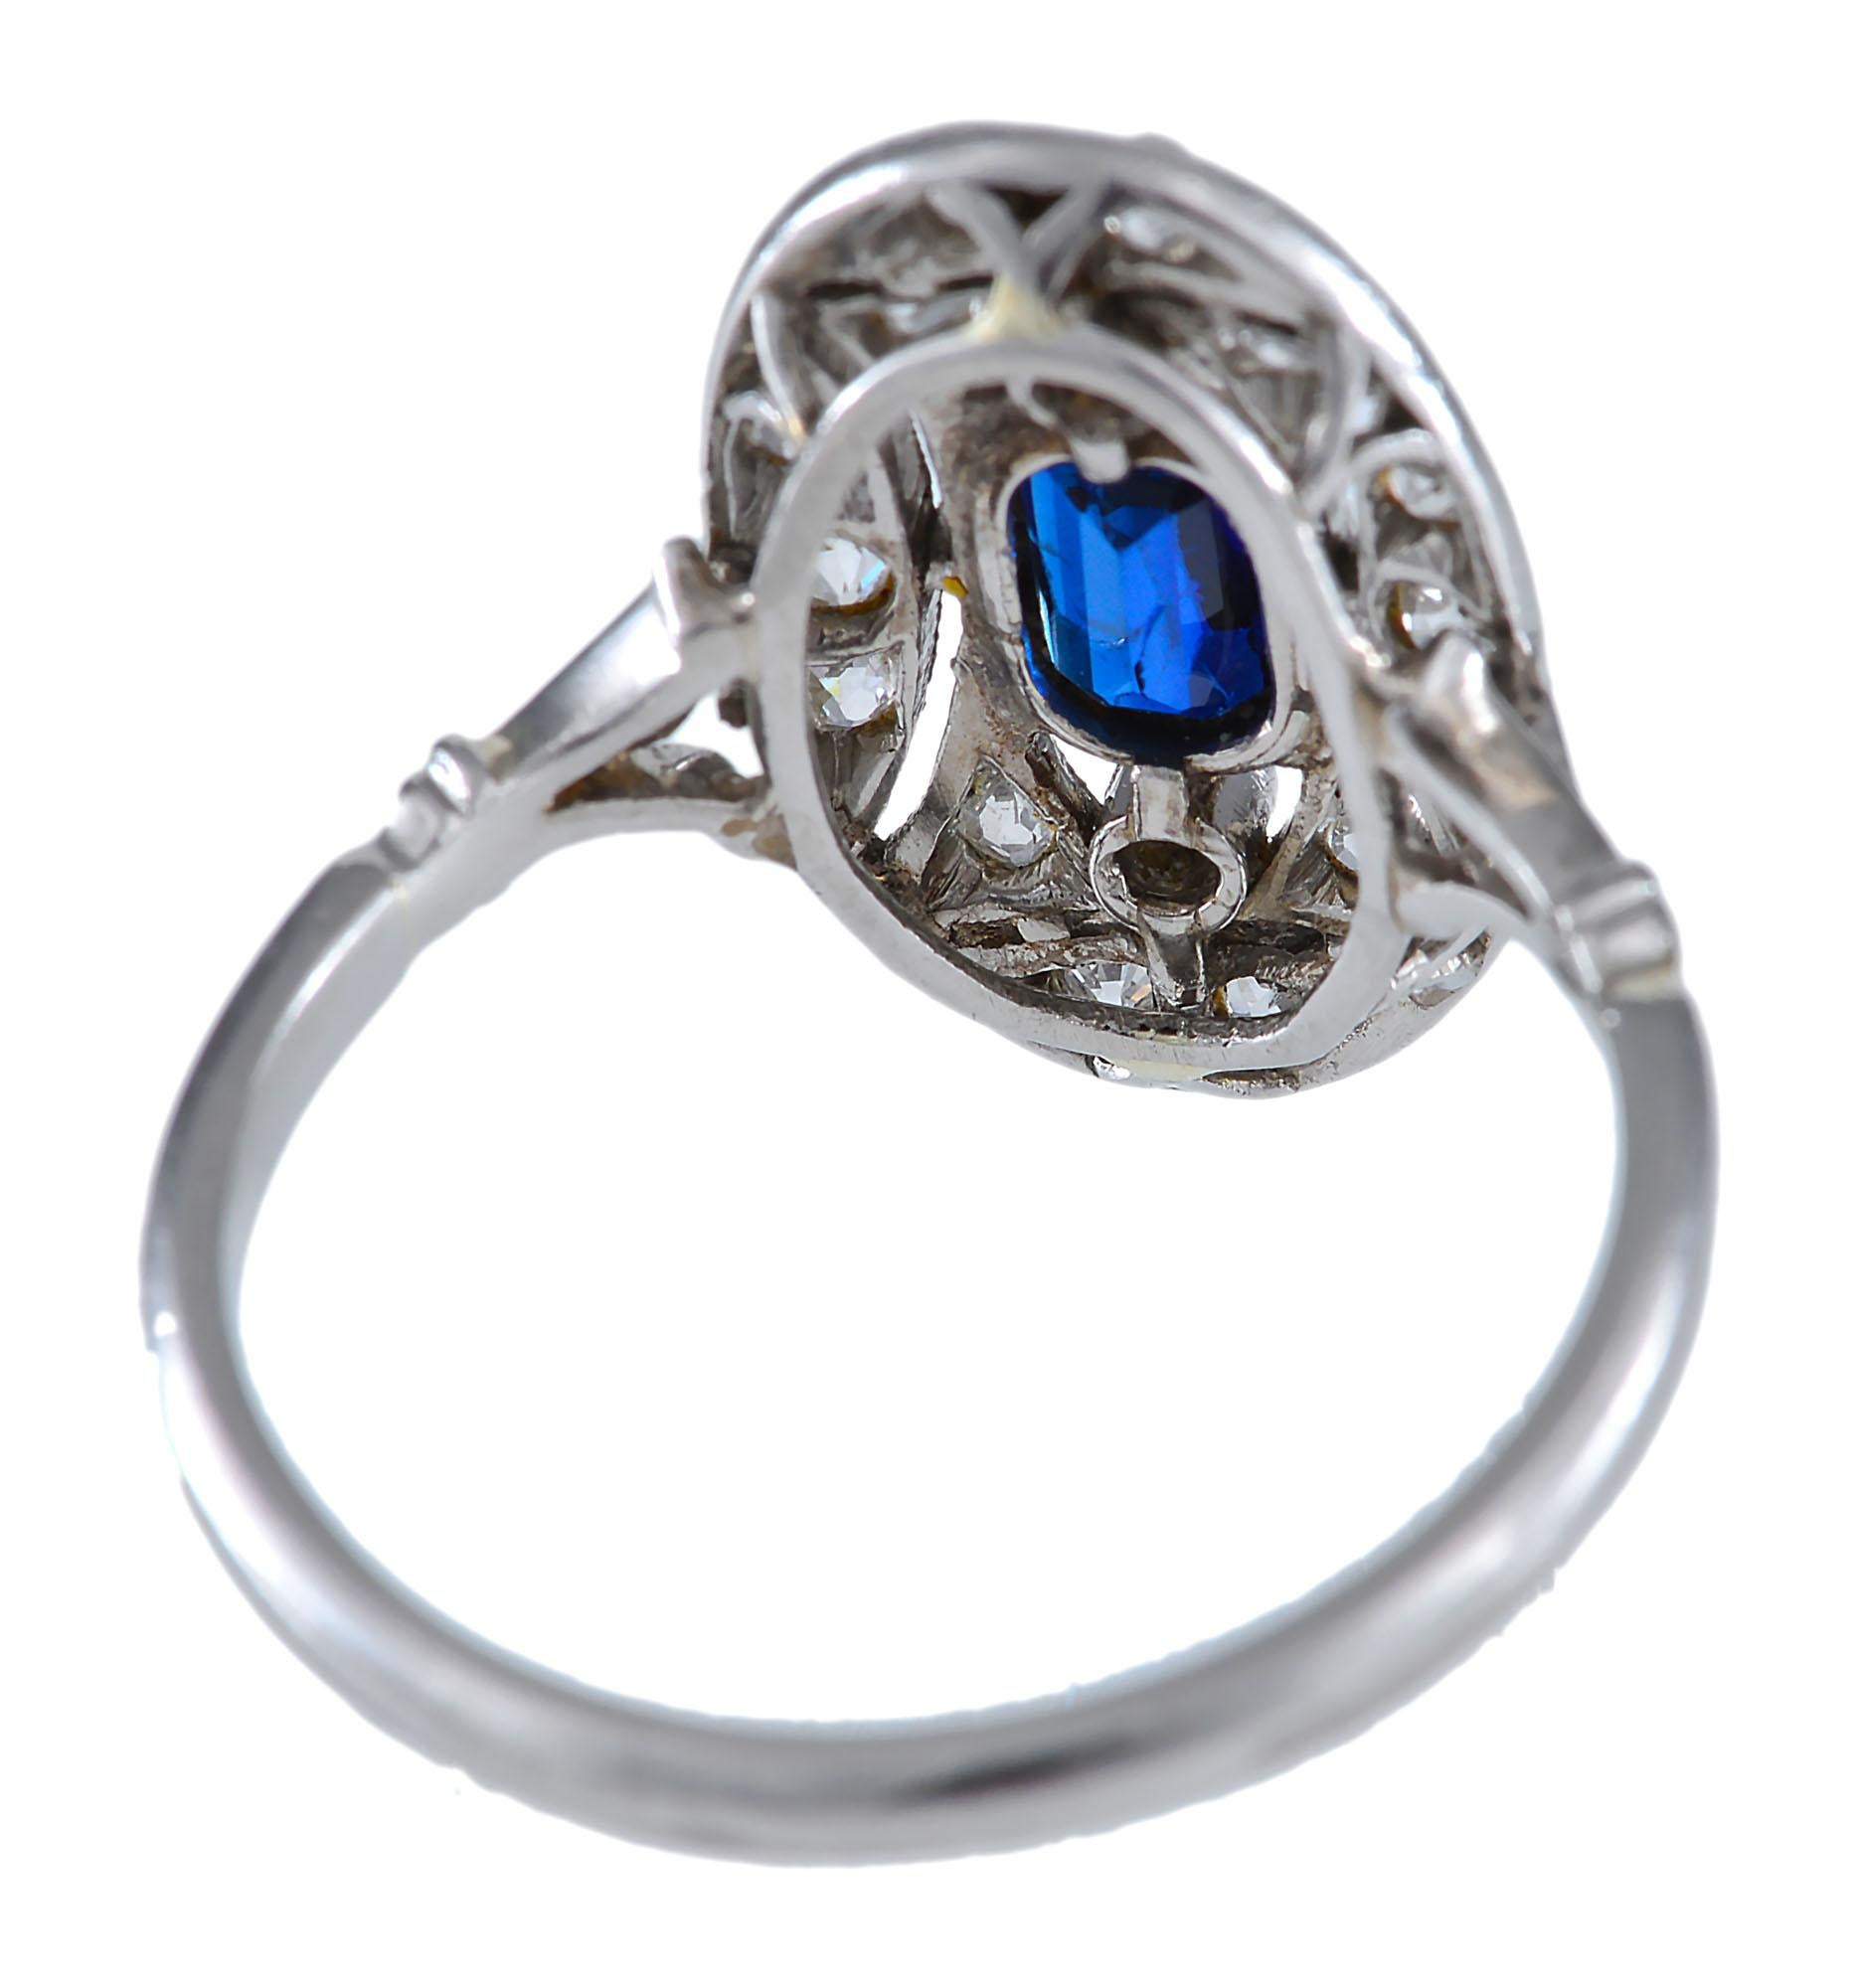 An Edwardian Diamond sapphire ring. The central Sapphire is crowned on either end with a single early Brilliant cut diamond and surrounded with an oval of diamonds within a very fine platinum mount pierced in geometrical shapes. The shoulders of the